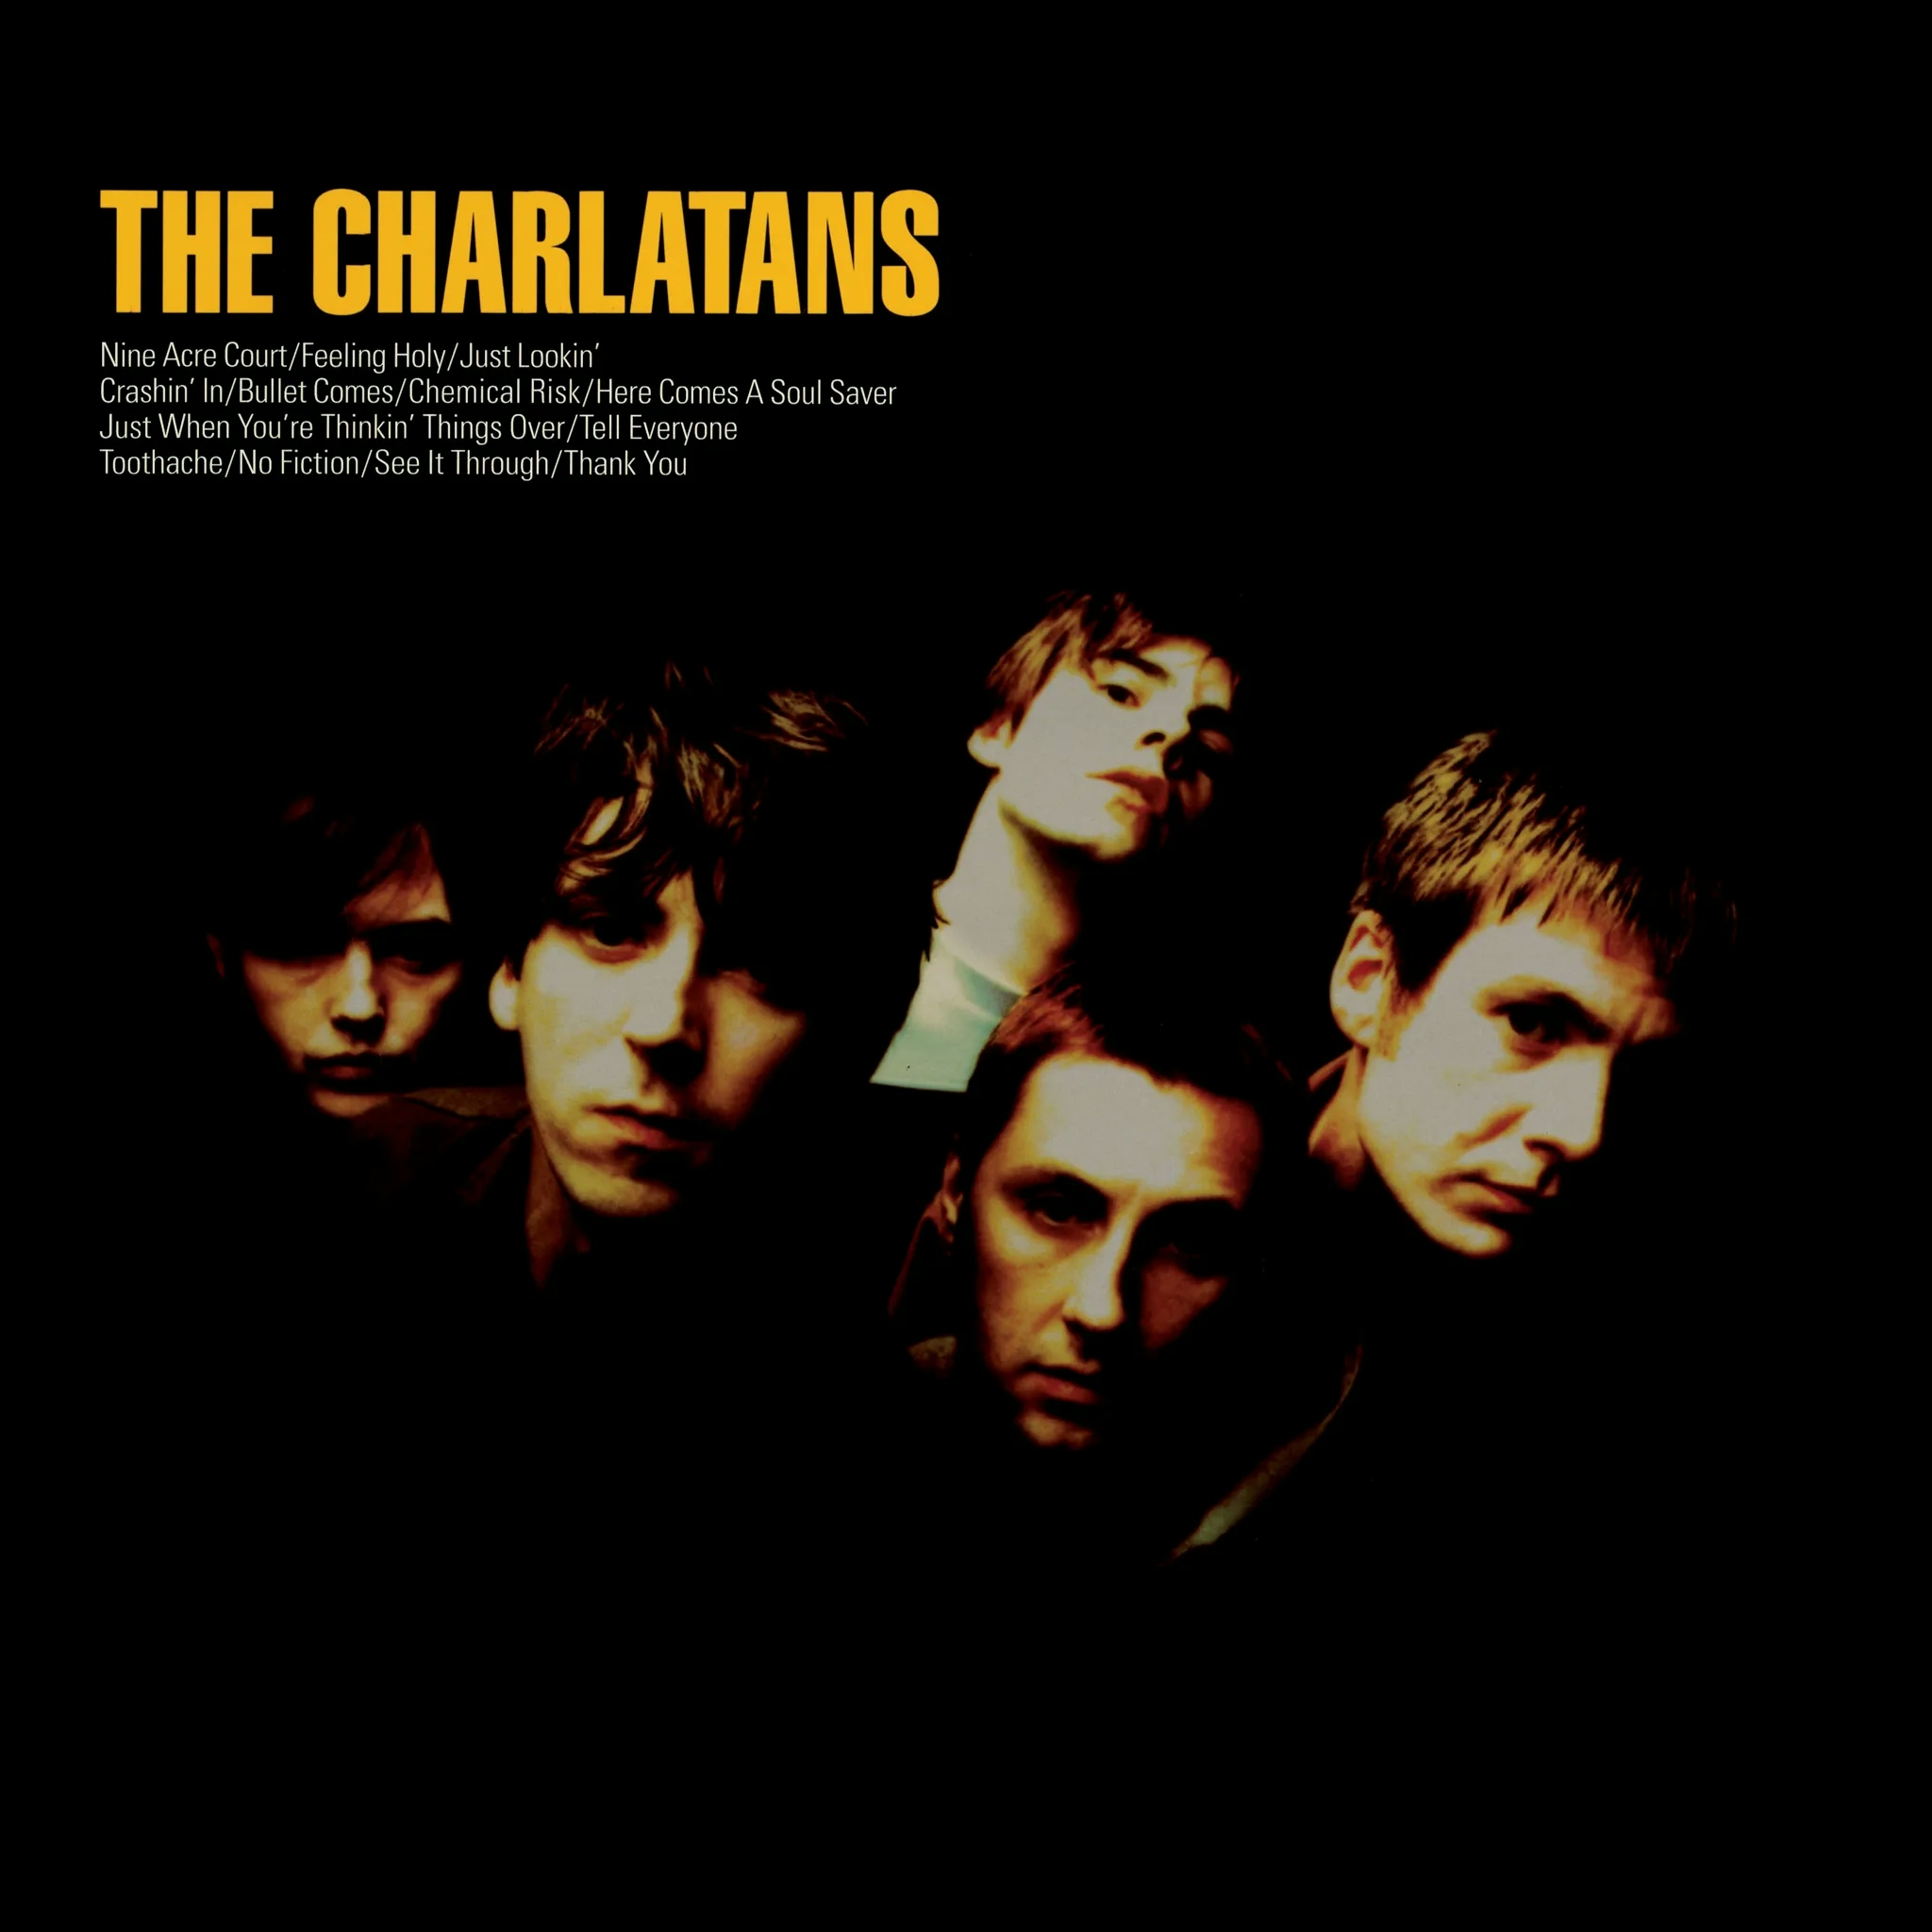 Album artwork for The Charlatans by The Charlatans